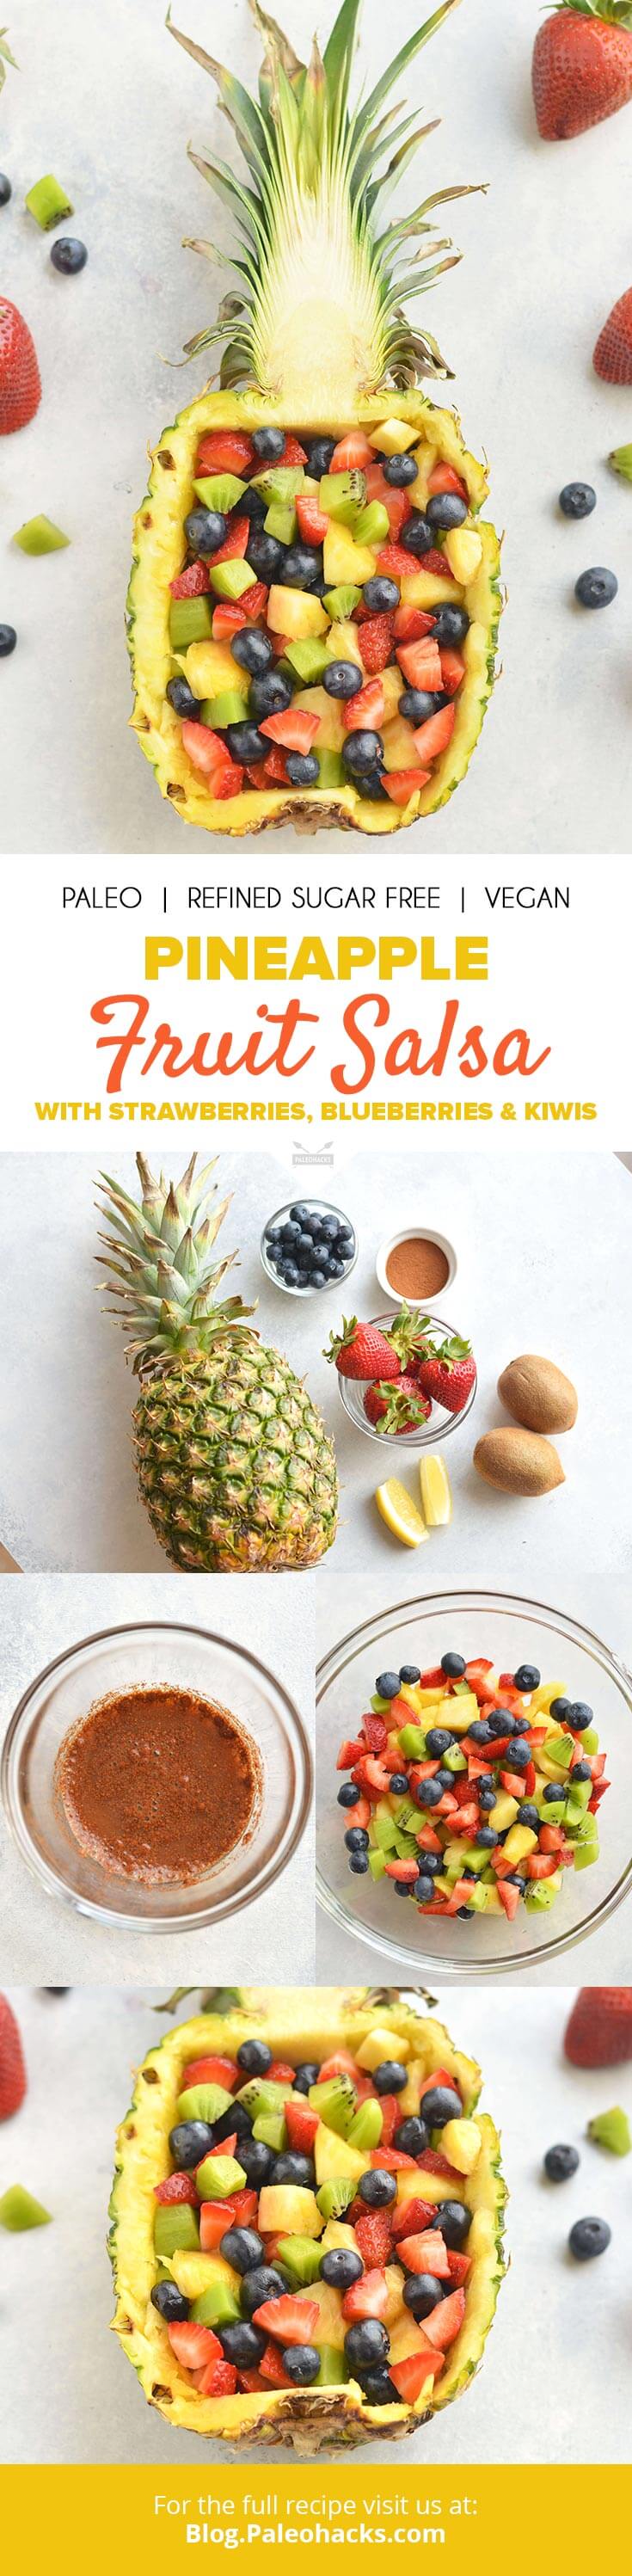 Serve this fresh and easy strawberry kiwi fruit salsa in a hollowed-out pineapple bowl for a warm weather cookout dazzler!